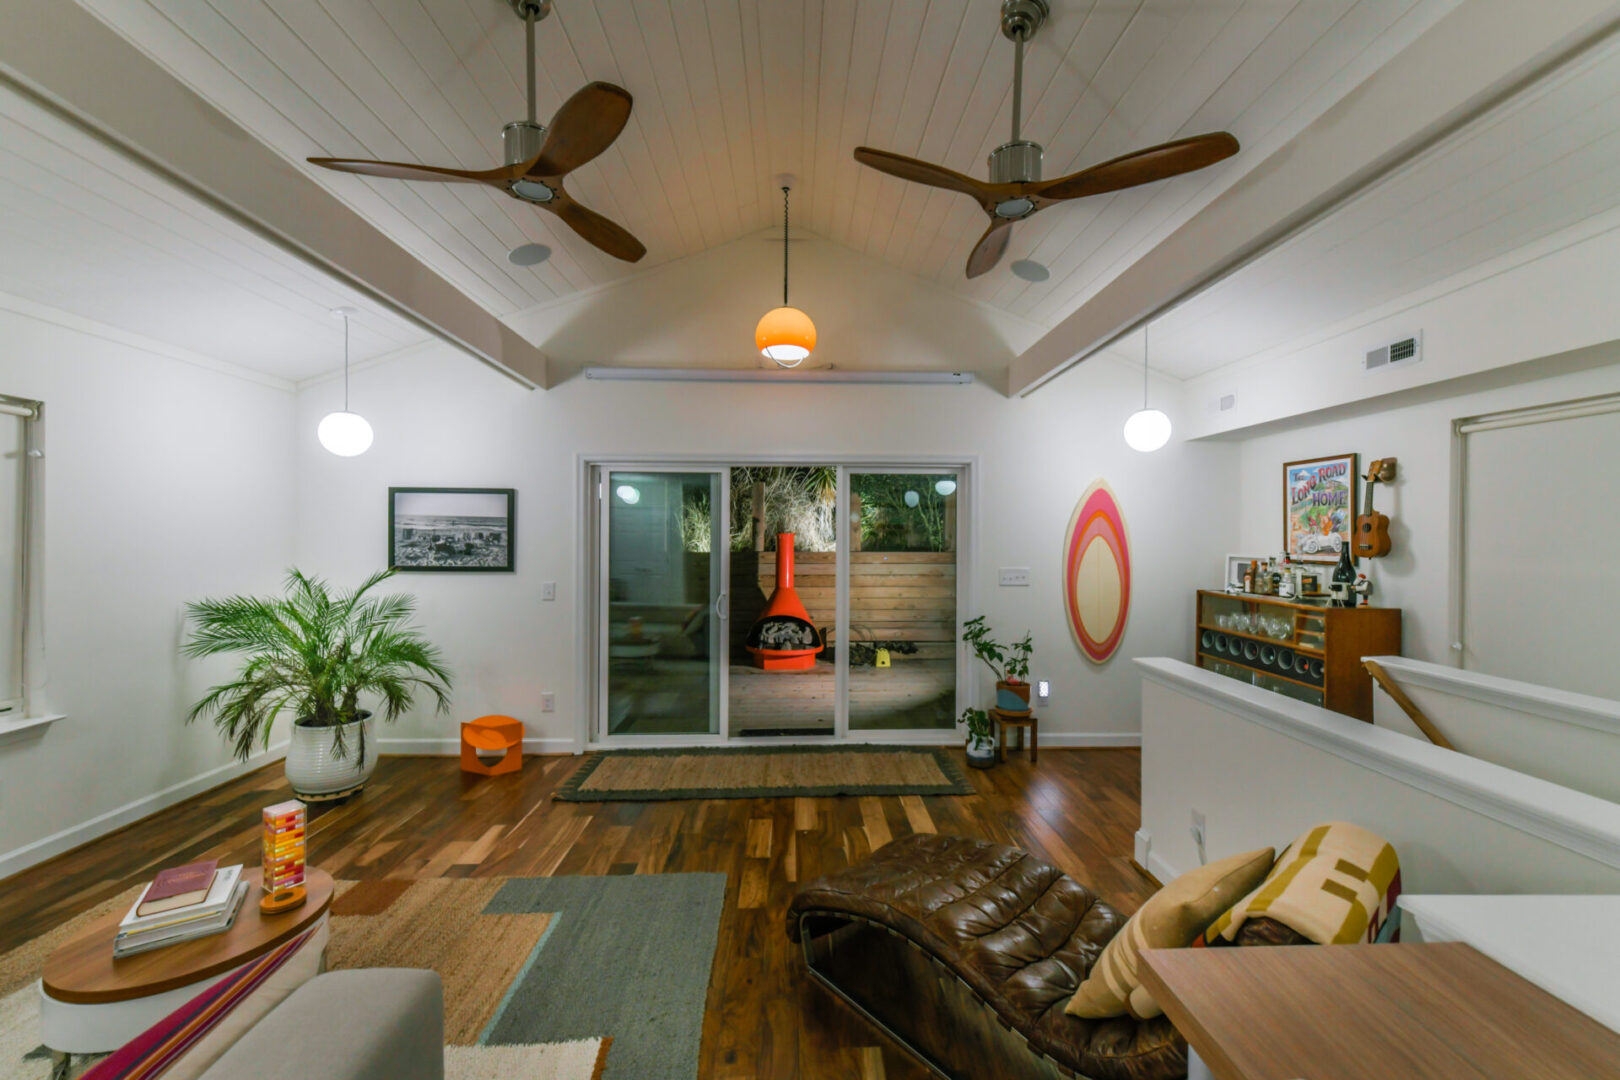 A living room with hard wood floors and ceiling fans.